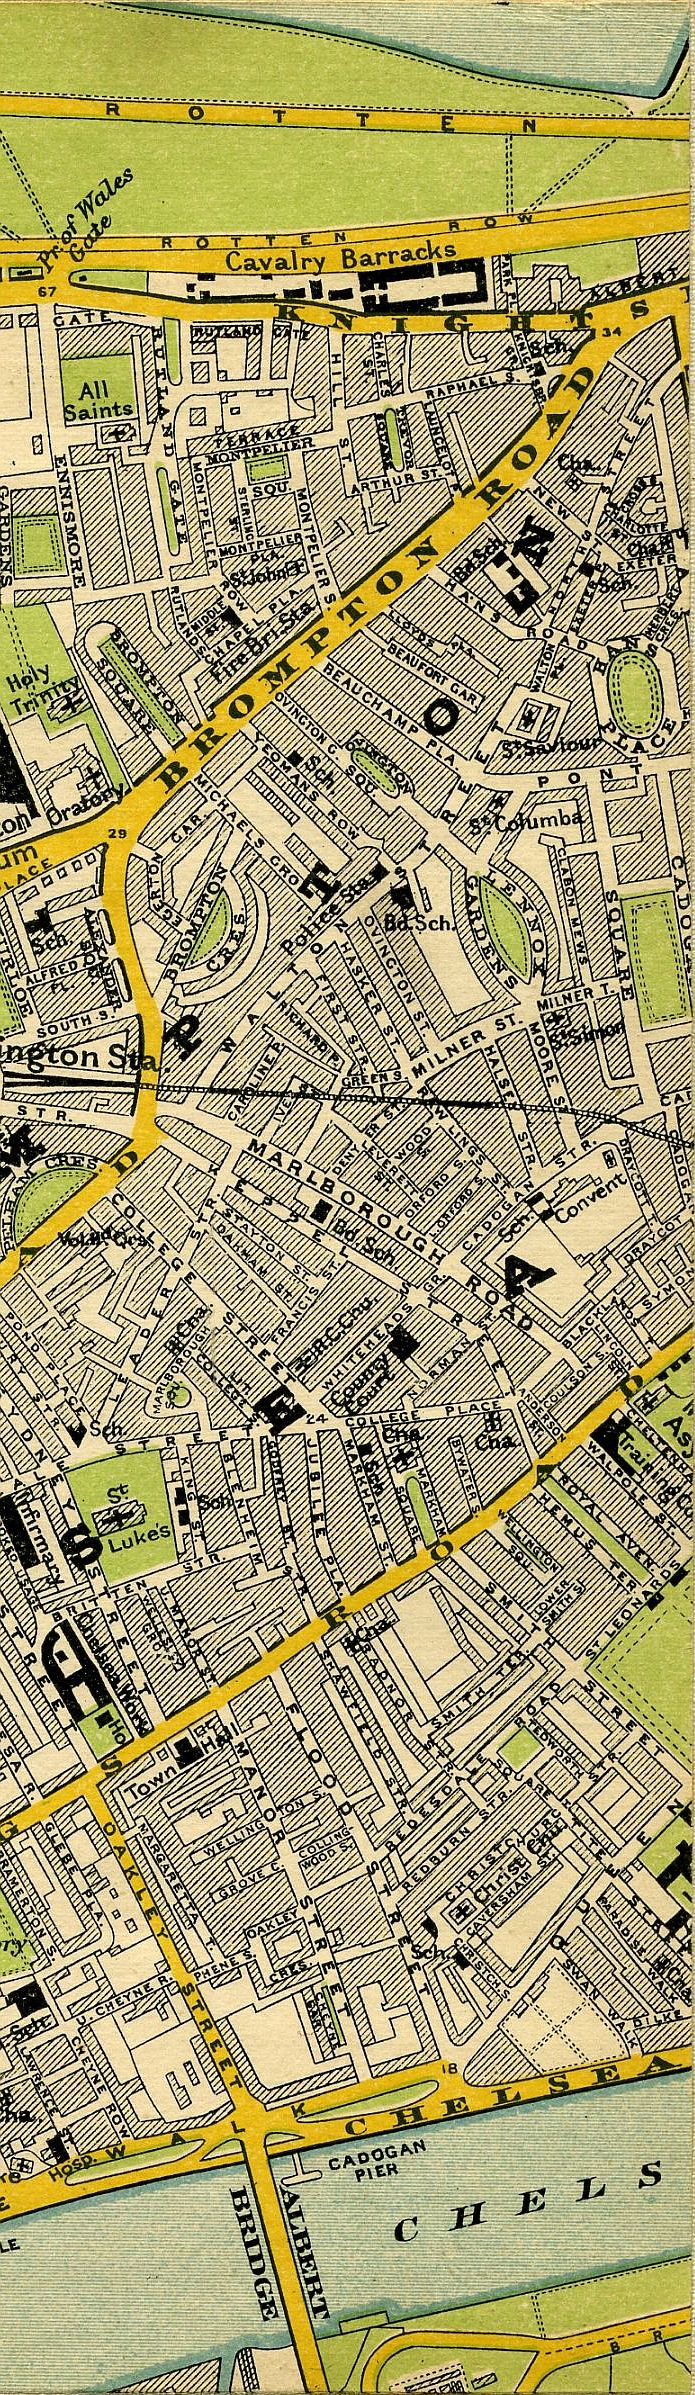 Stanford's Map Of Central London 1897